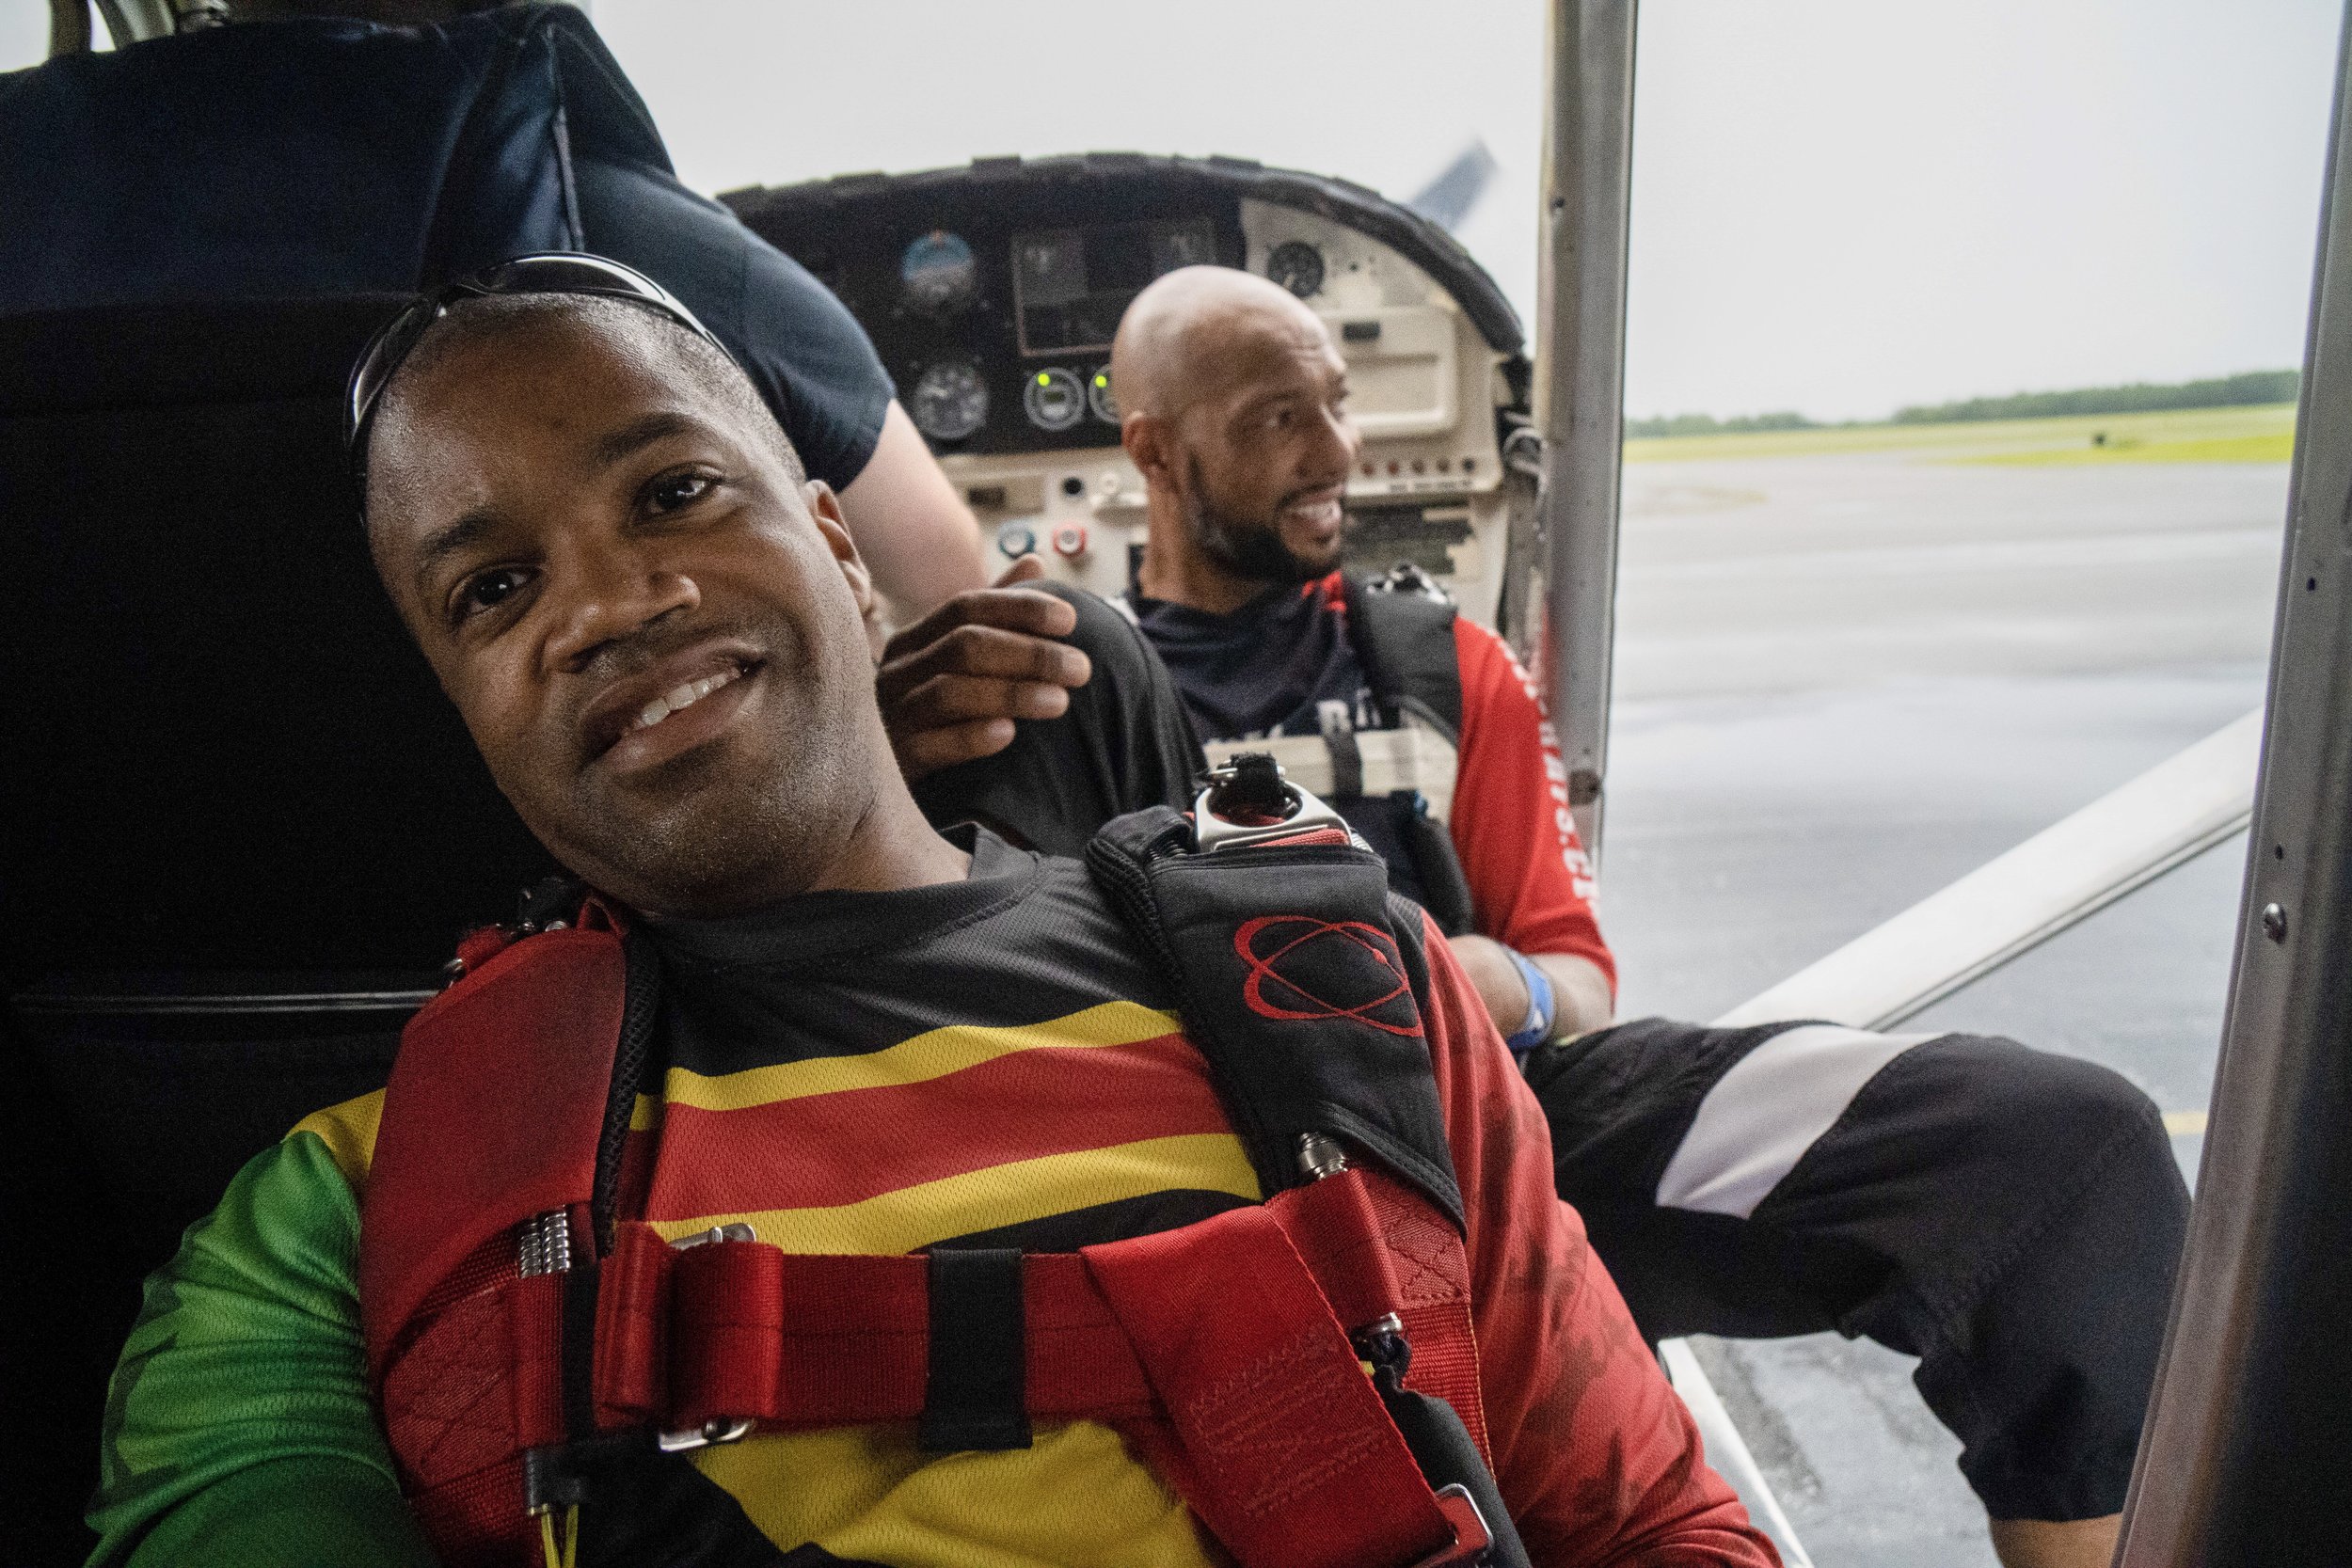   Nicholas Walker  started parachuting in 2002 while serving with 7th Special Forces Group and JSOC. He became a licensed civilian skydiver in 2008.   